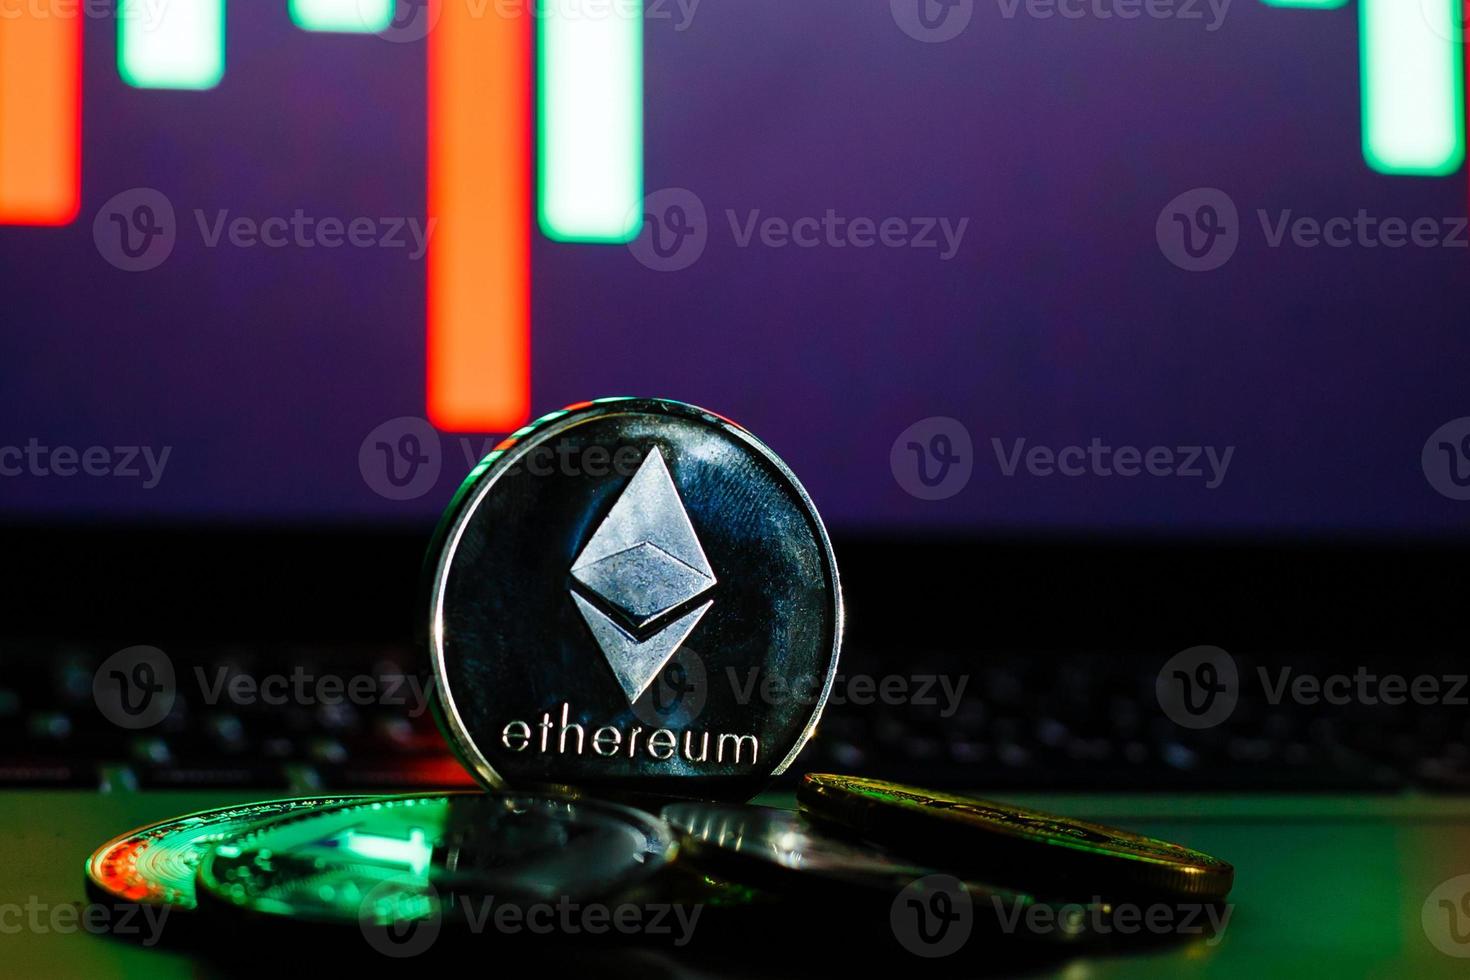 Digital currency physical ethereum coins on black computer keyboard photo